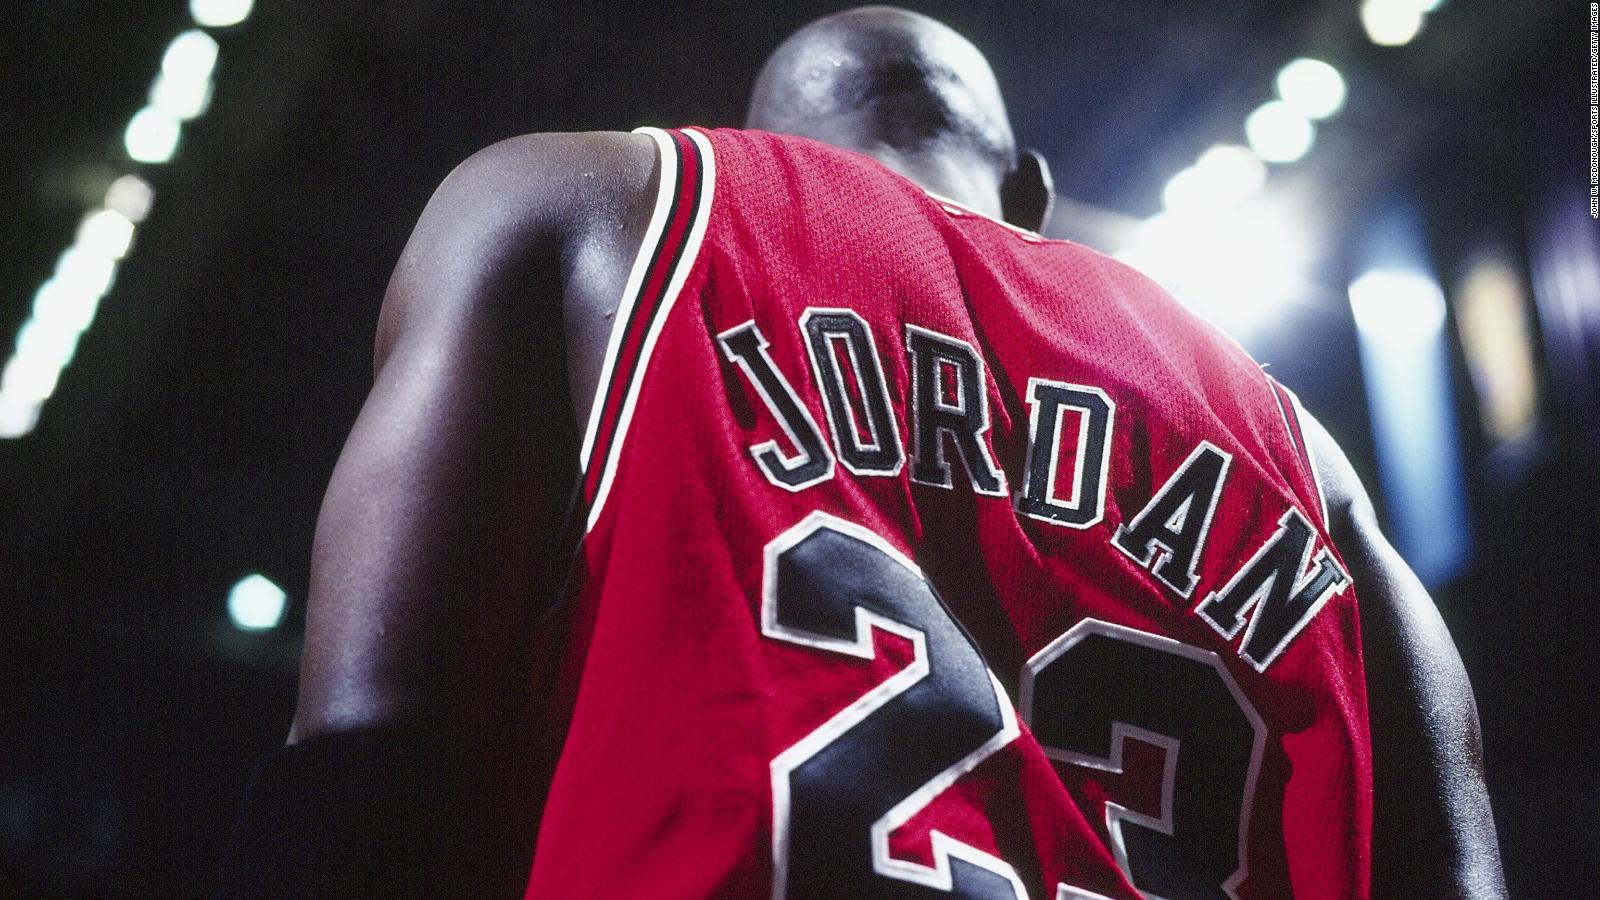 Michael Jordan's 'Last Dance' jersey sells for record amount at auction